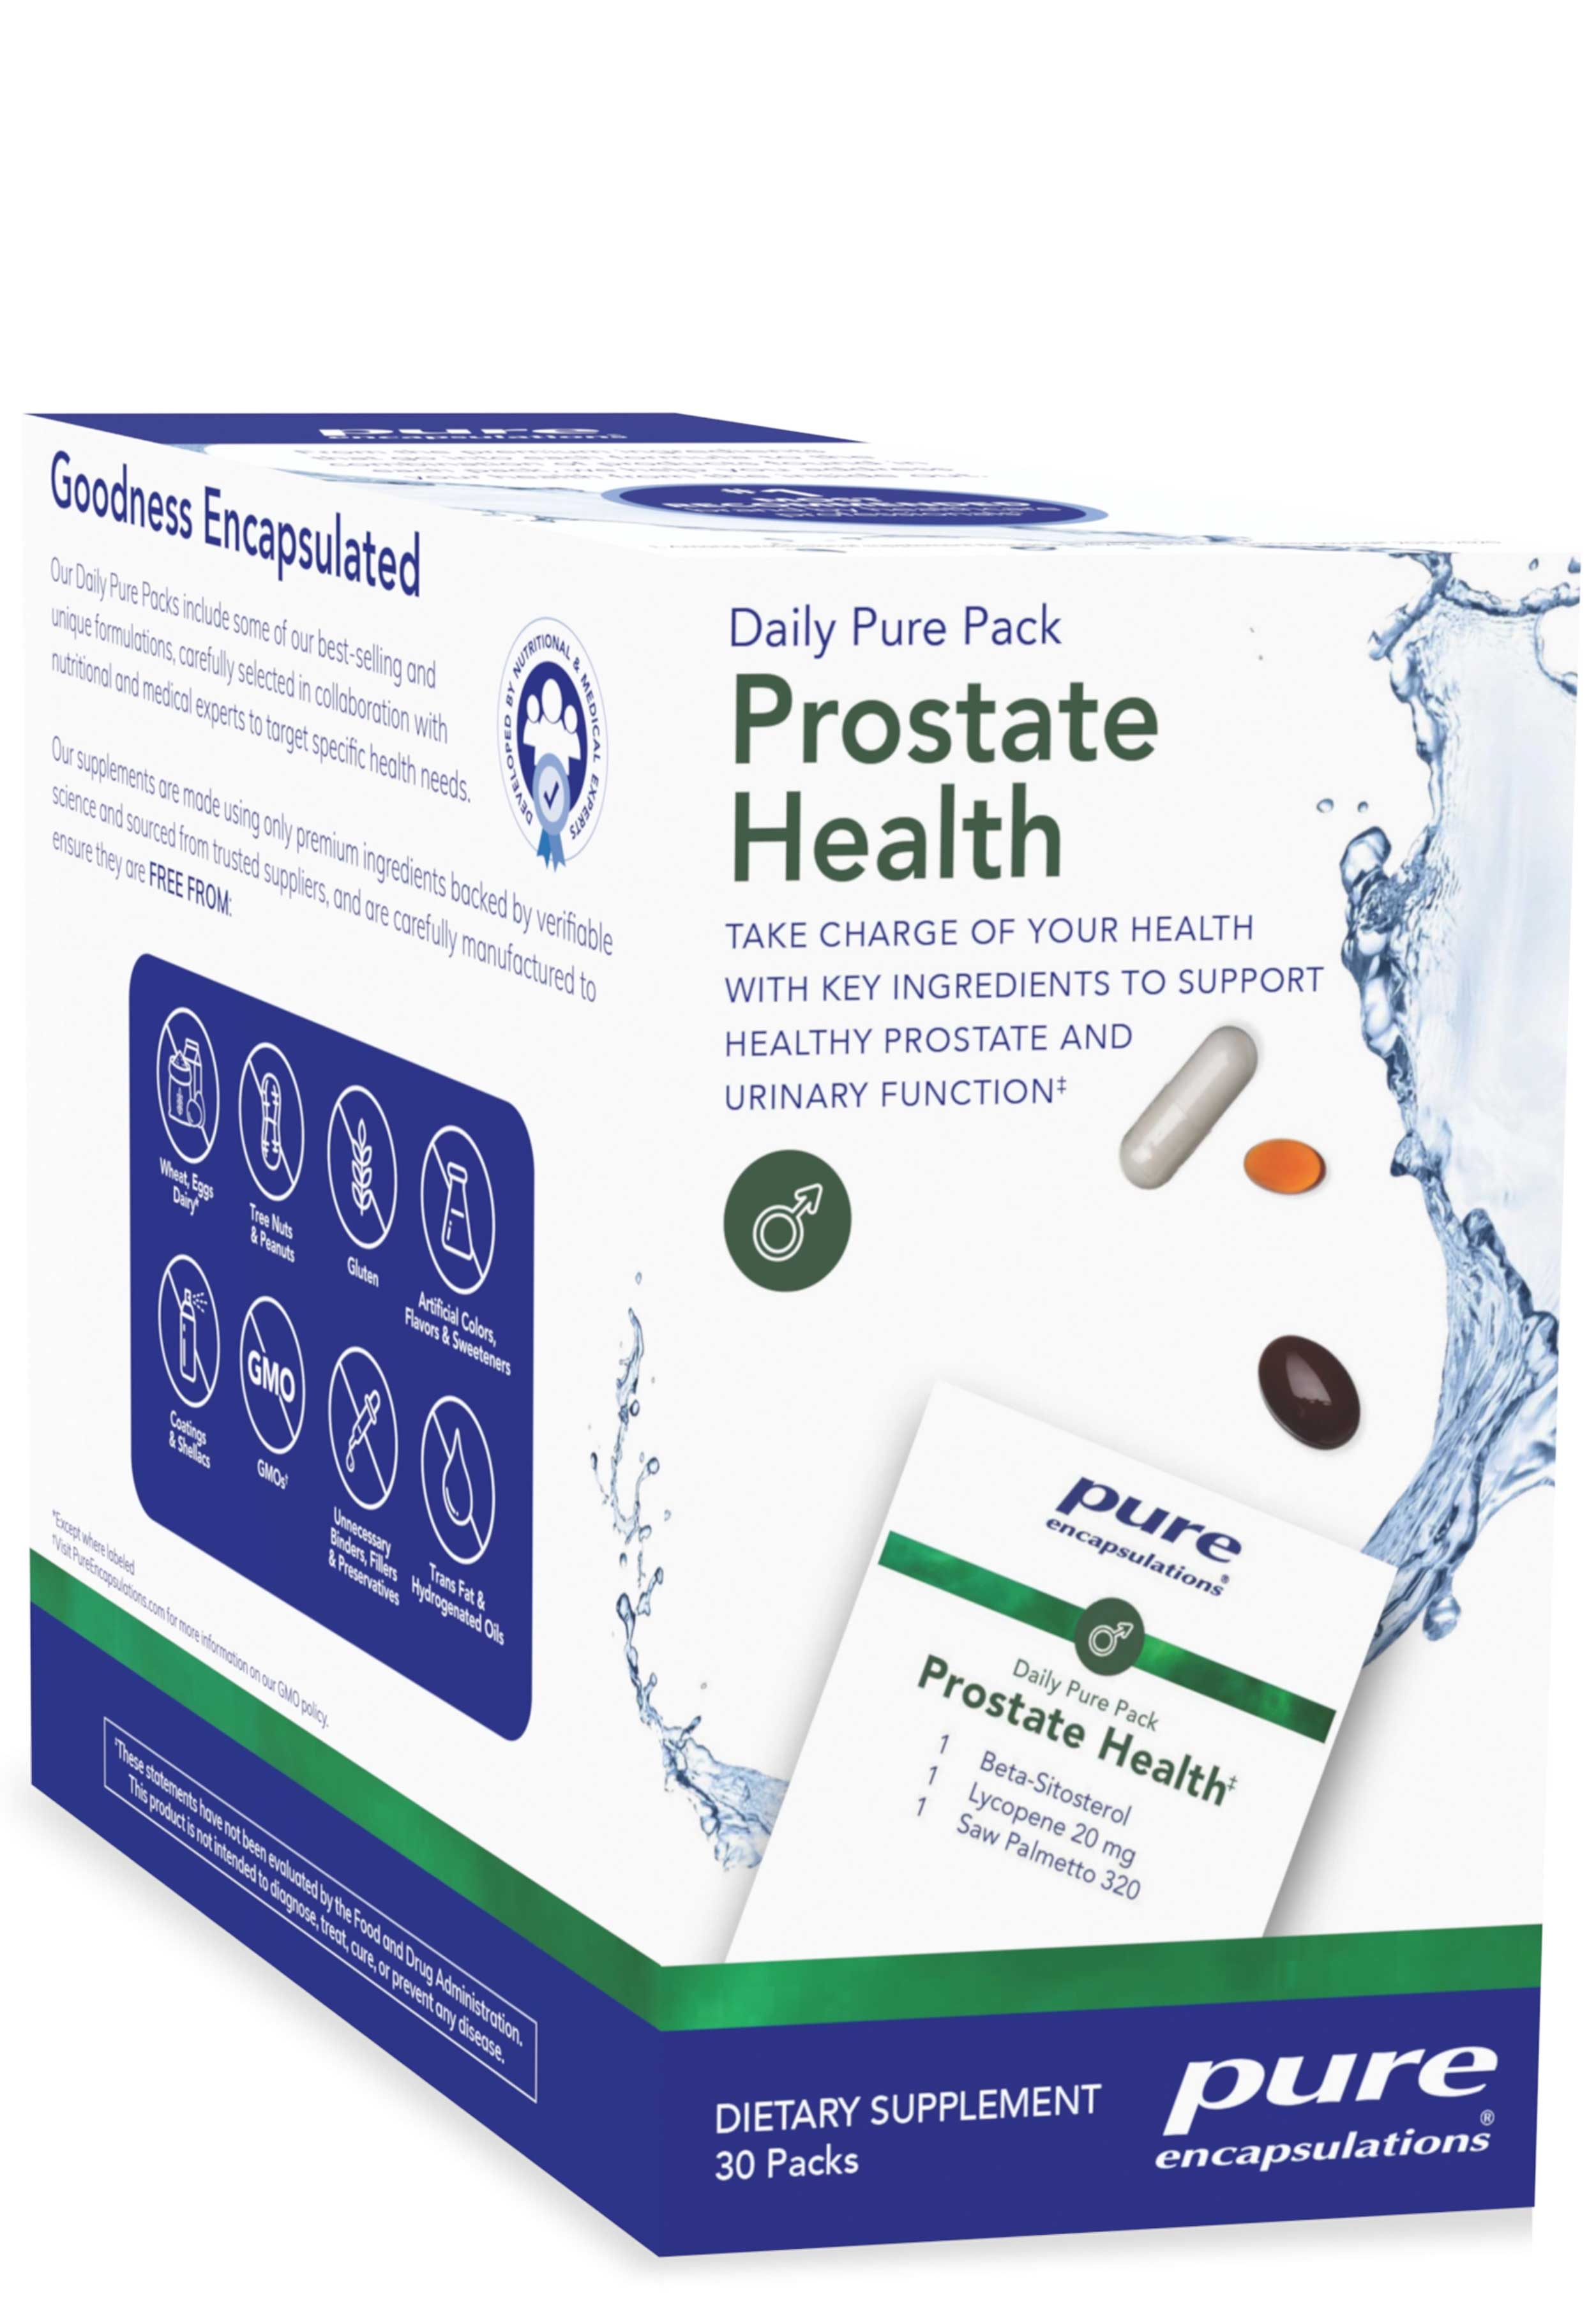 Pure Encapsulations Daily Pure Pack - Prostate Health